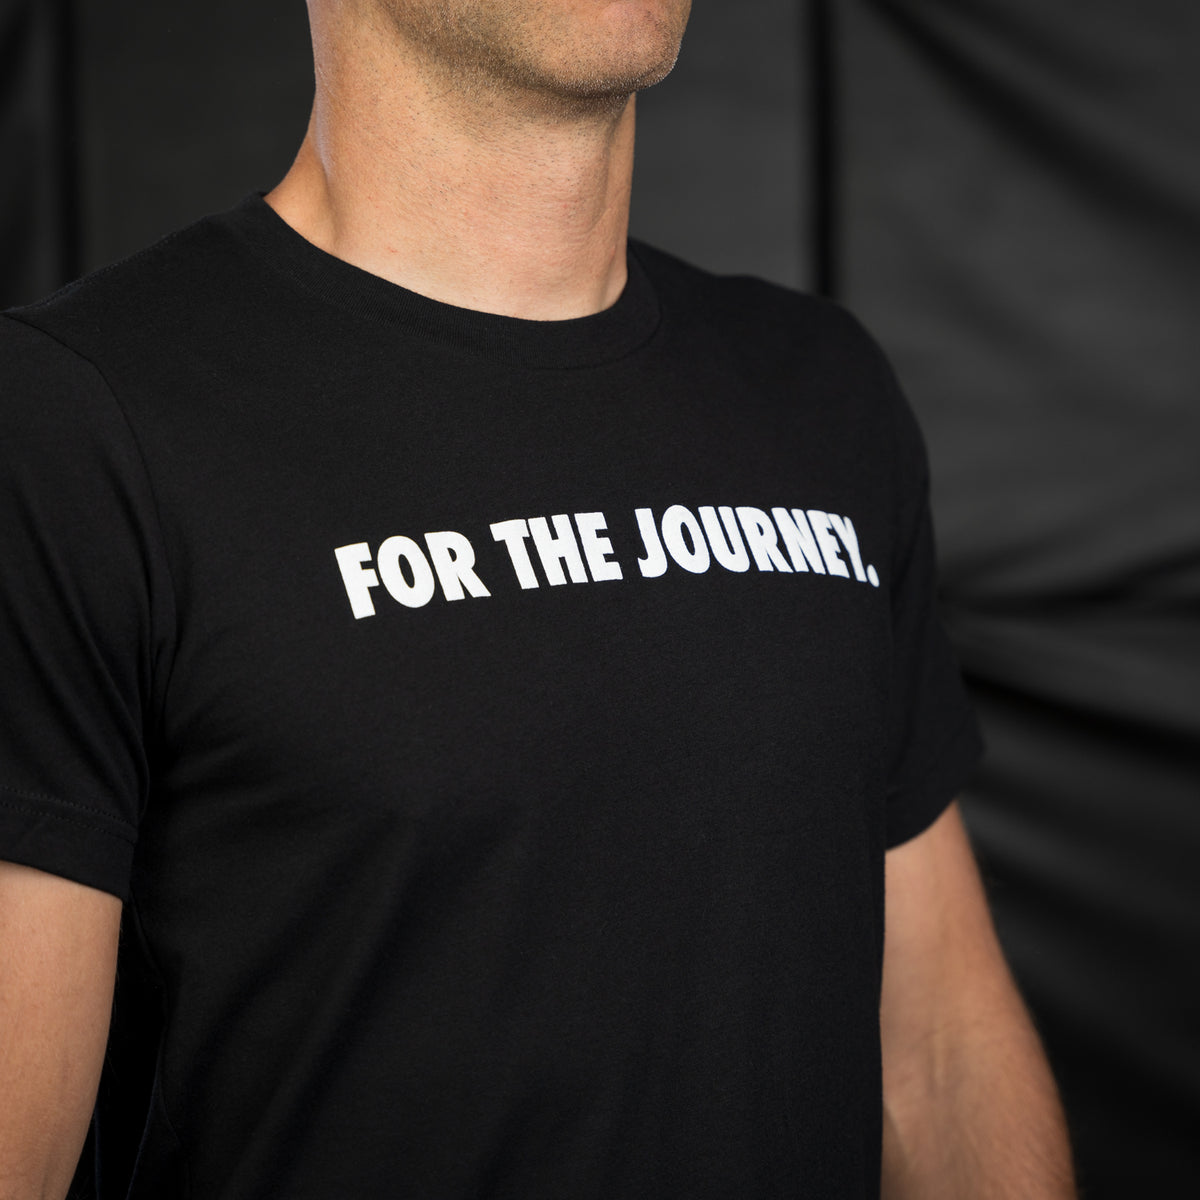 For The Journey Shirt